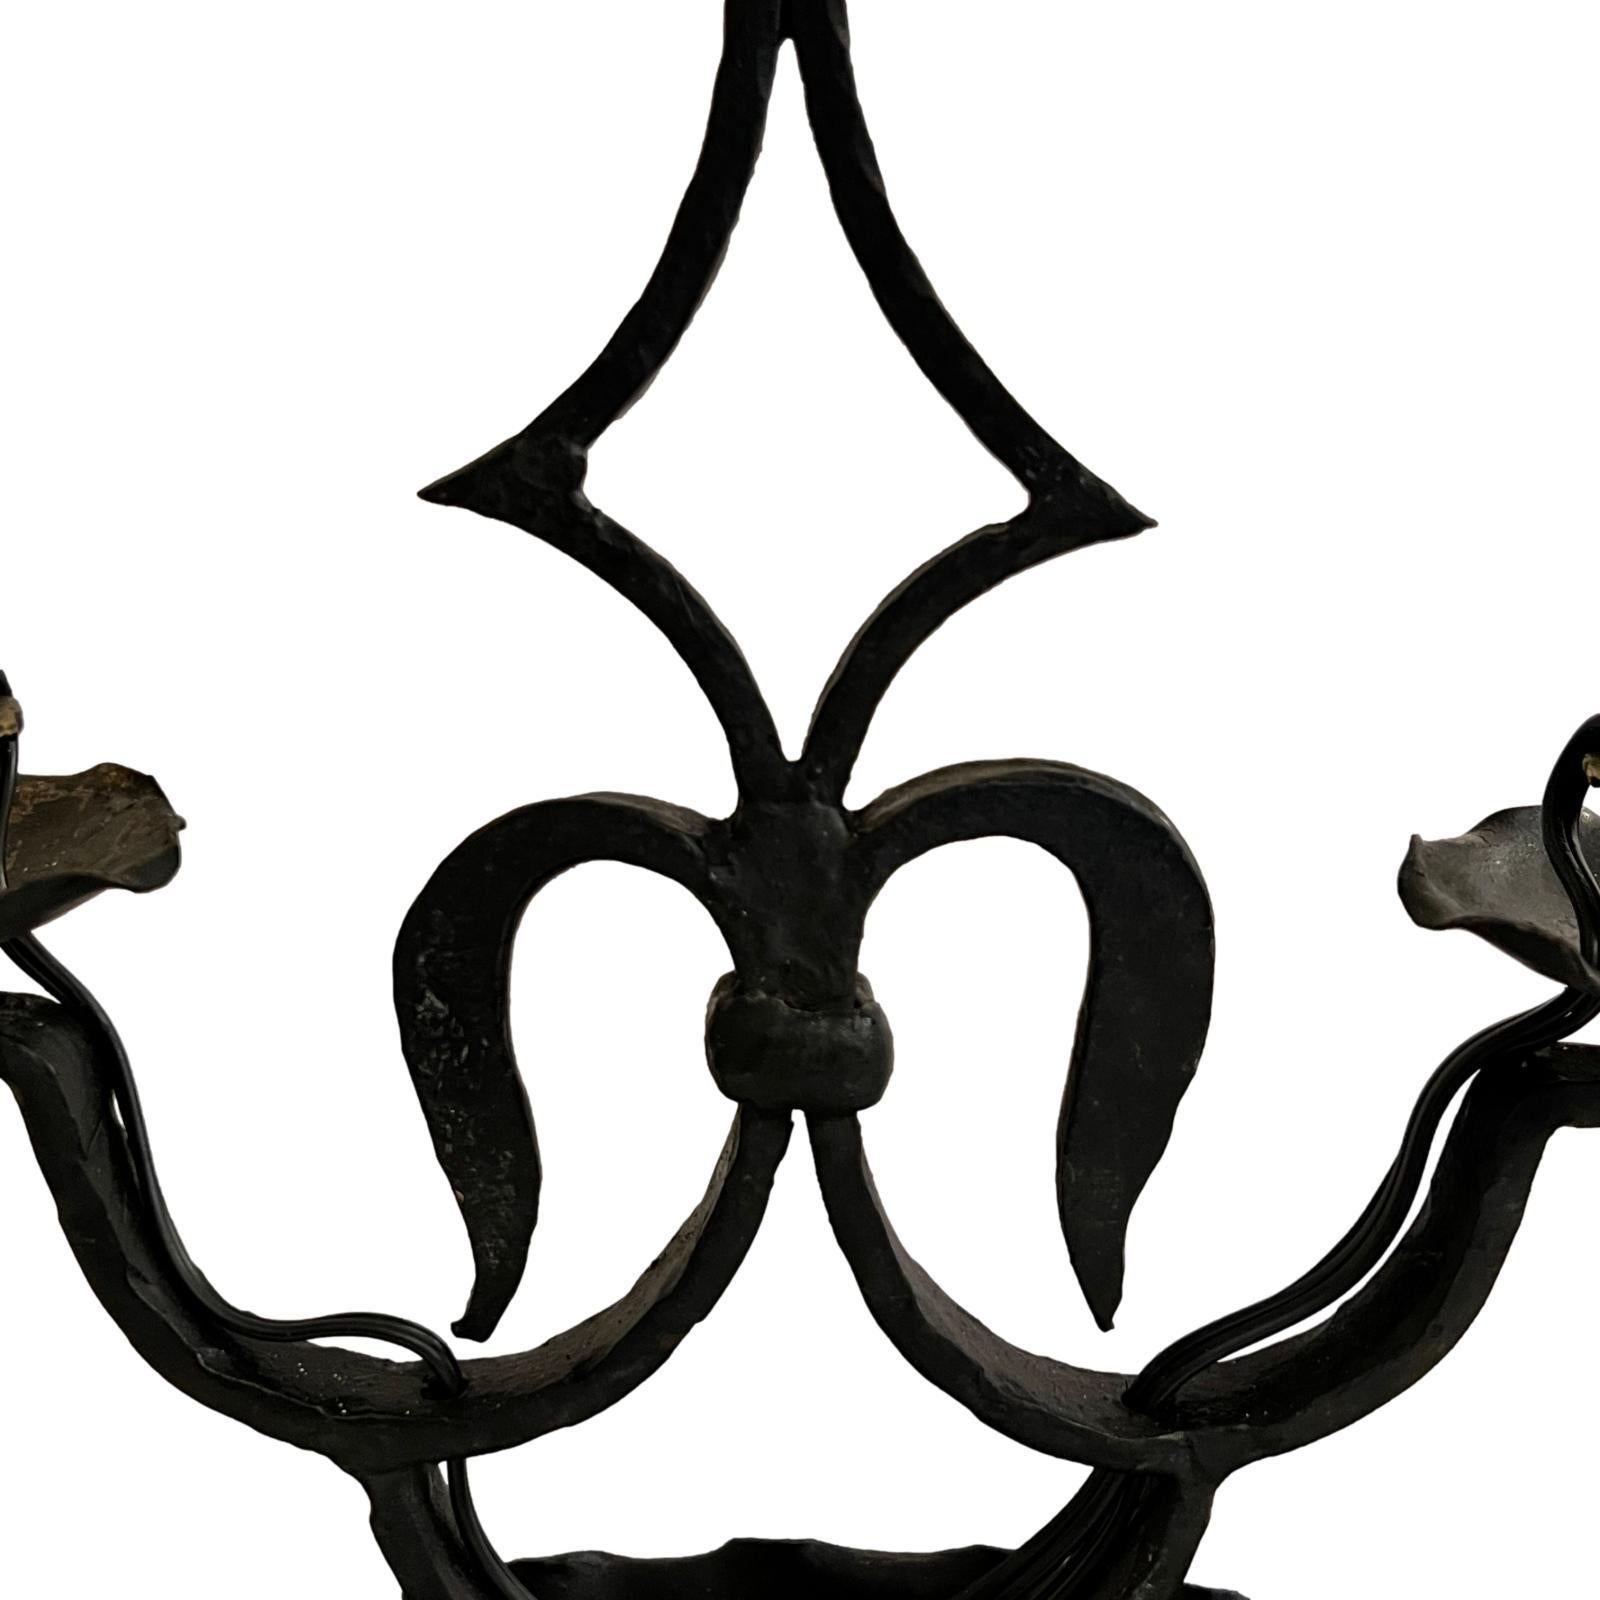 A circa 1920's French wrought iron table lamp with painted tole shade.

Measurements:
Height: 29